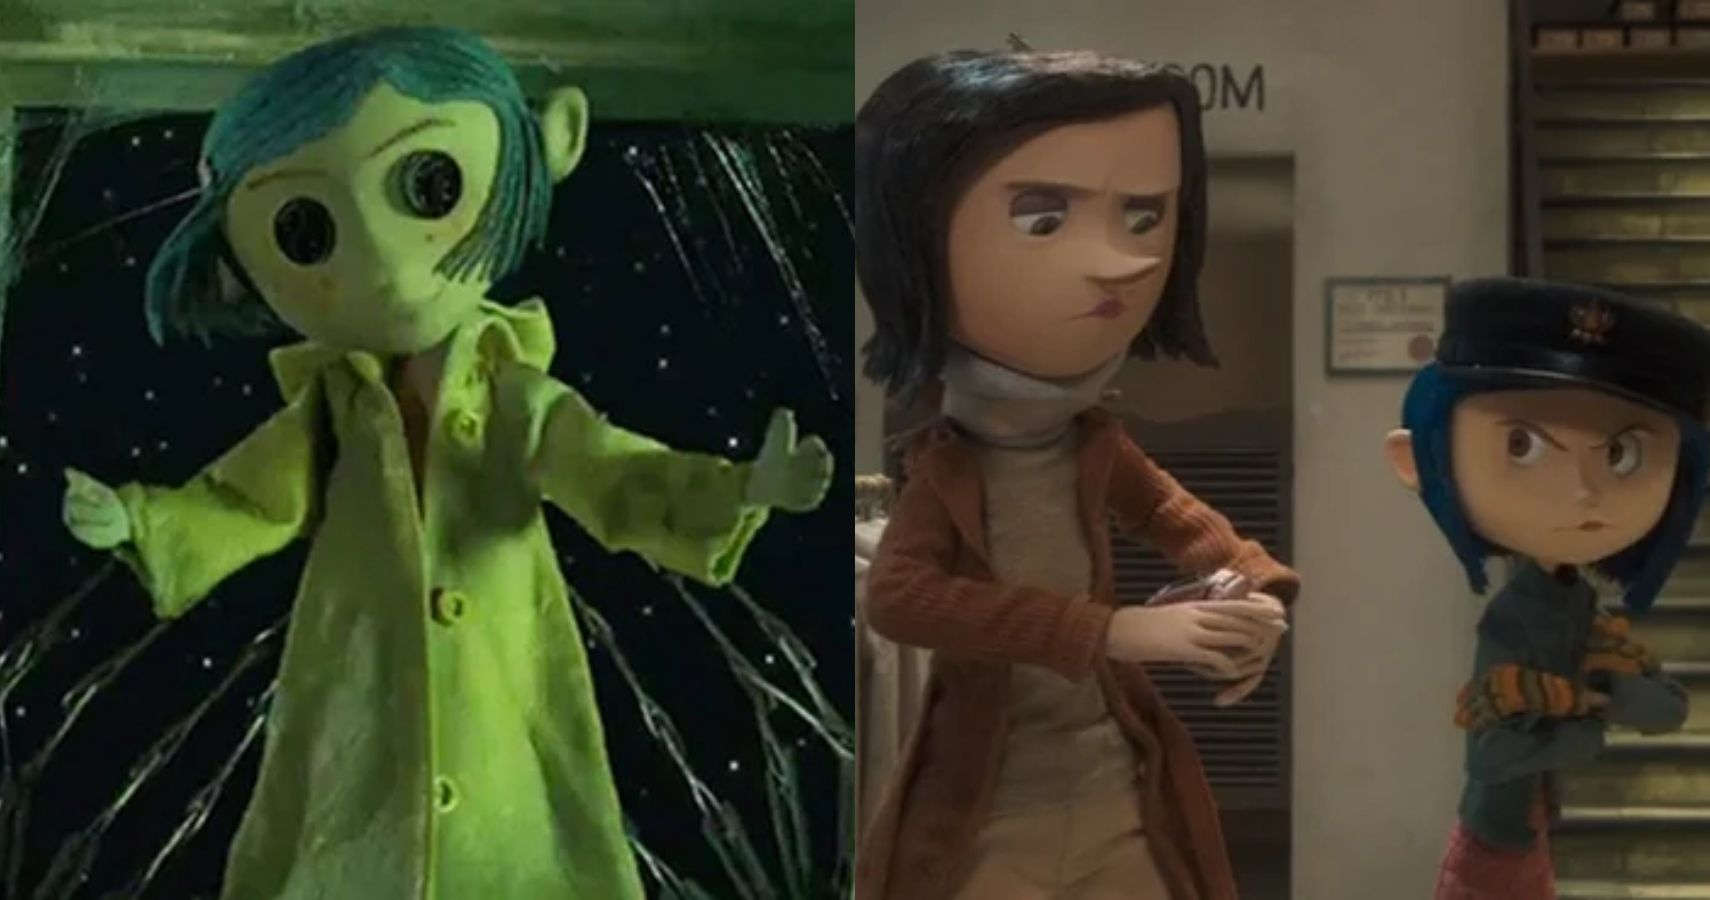 coraline movie review christian